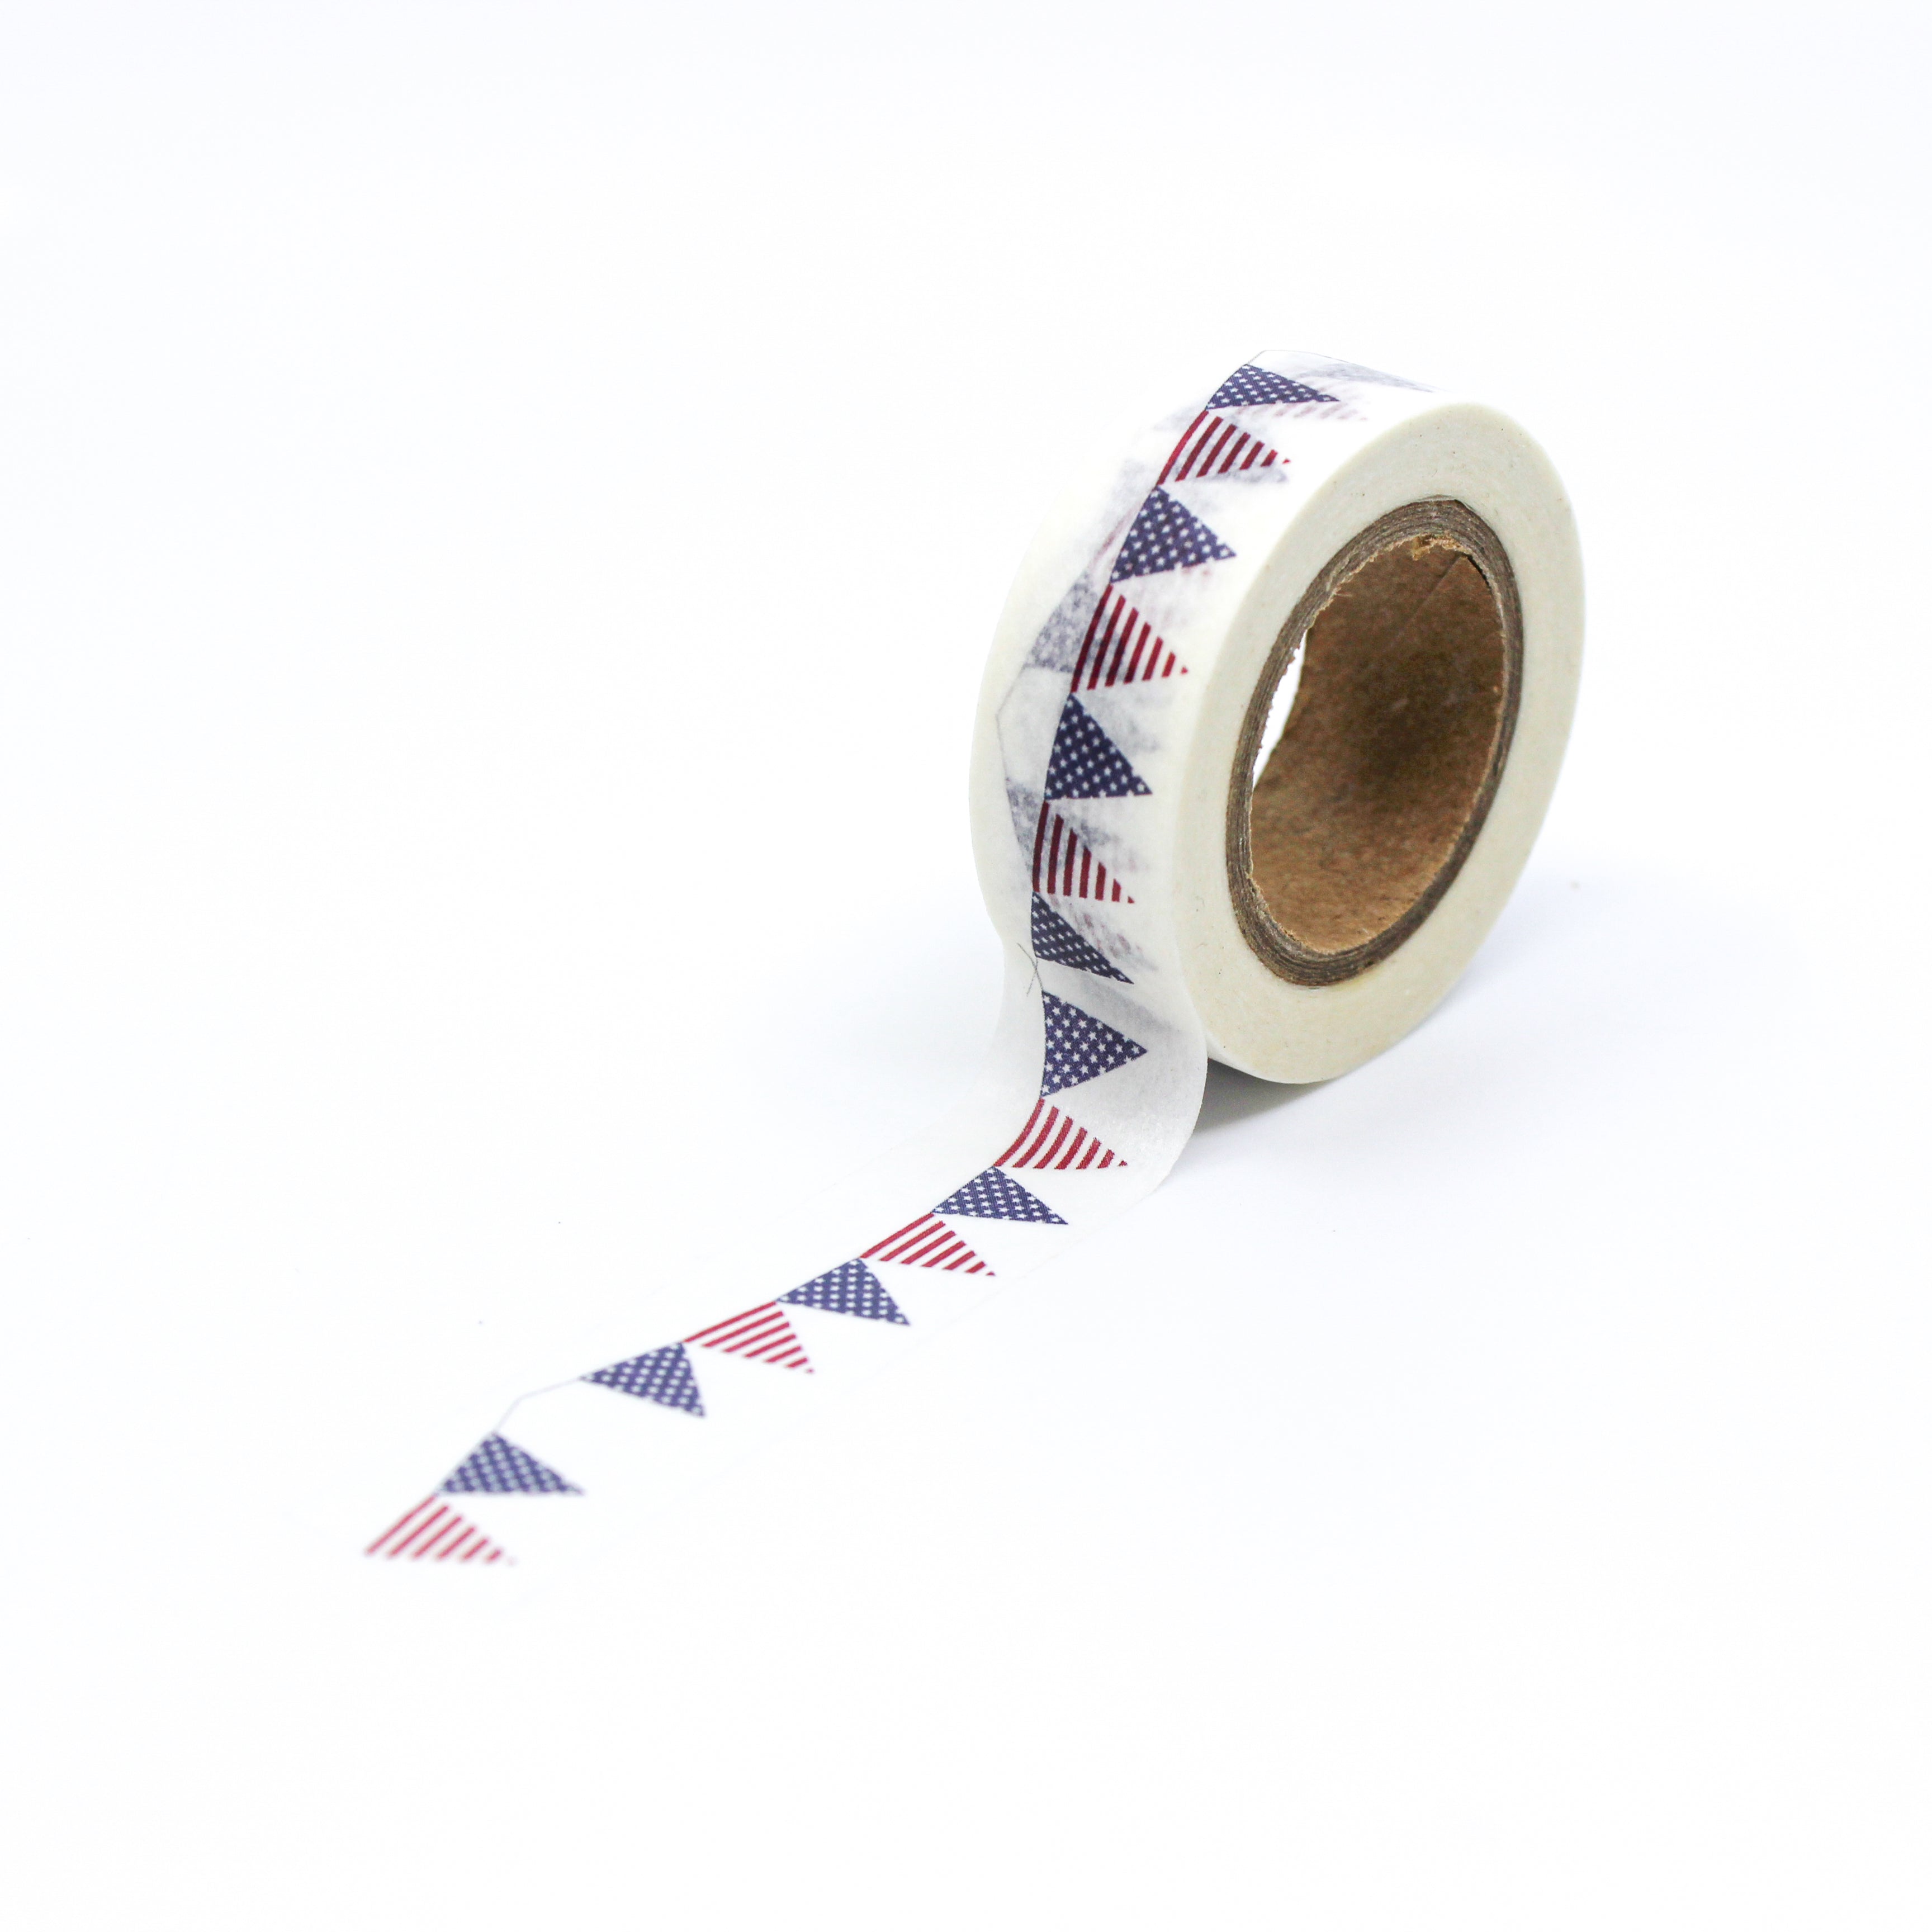 This is a full pattern repeat view of American flags banner washi tape BBB Supplies Craft Shop